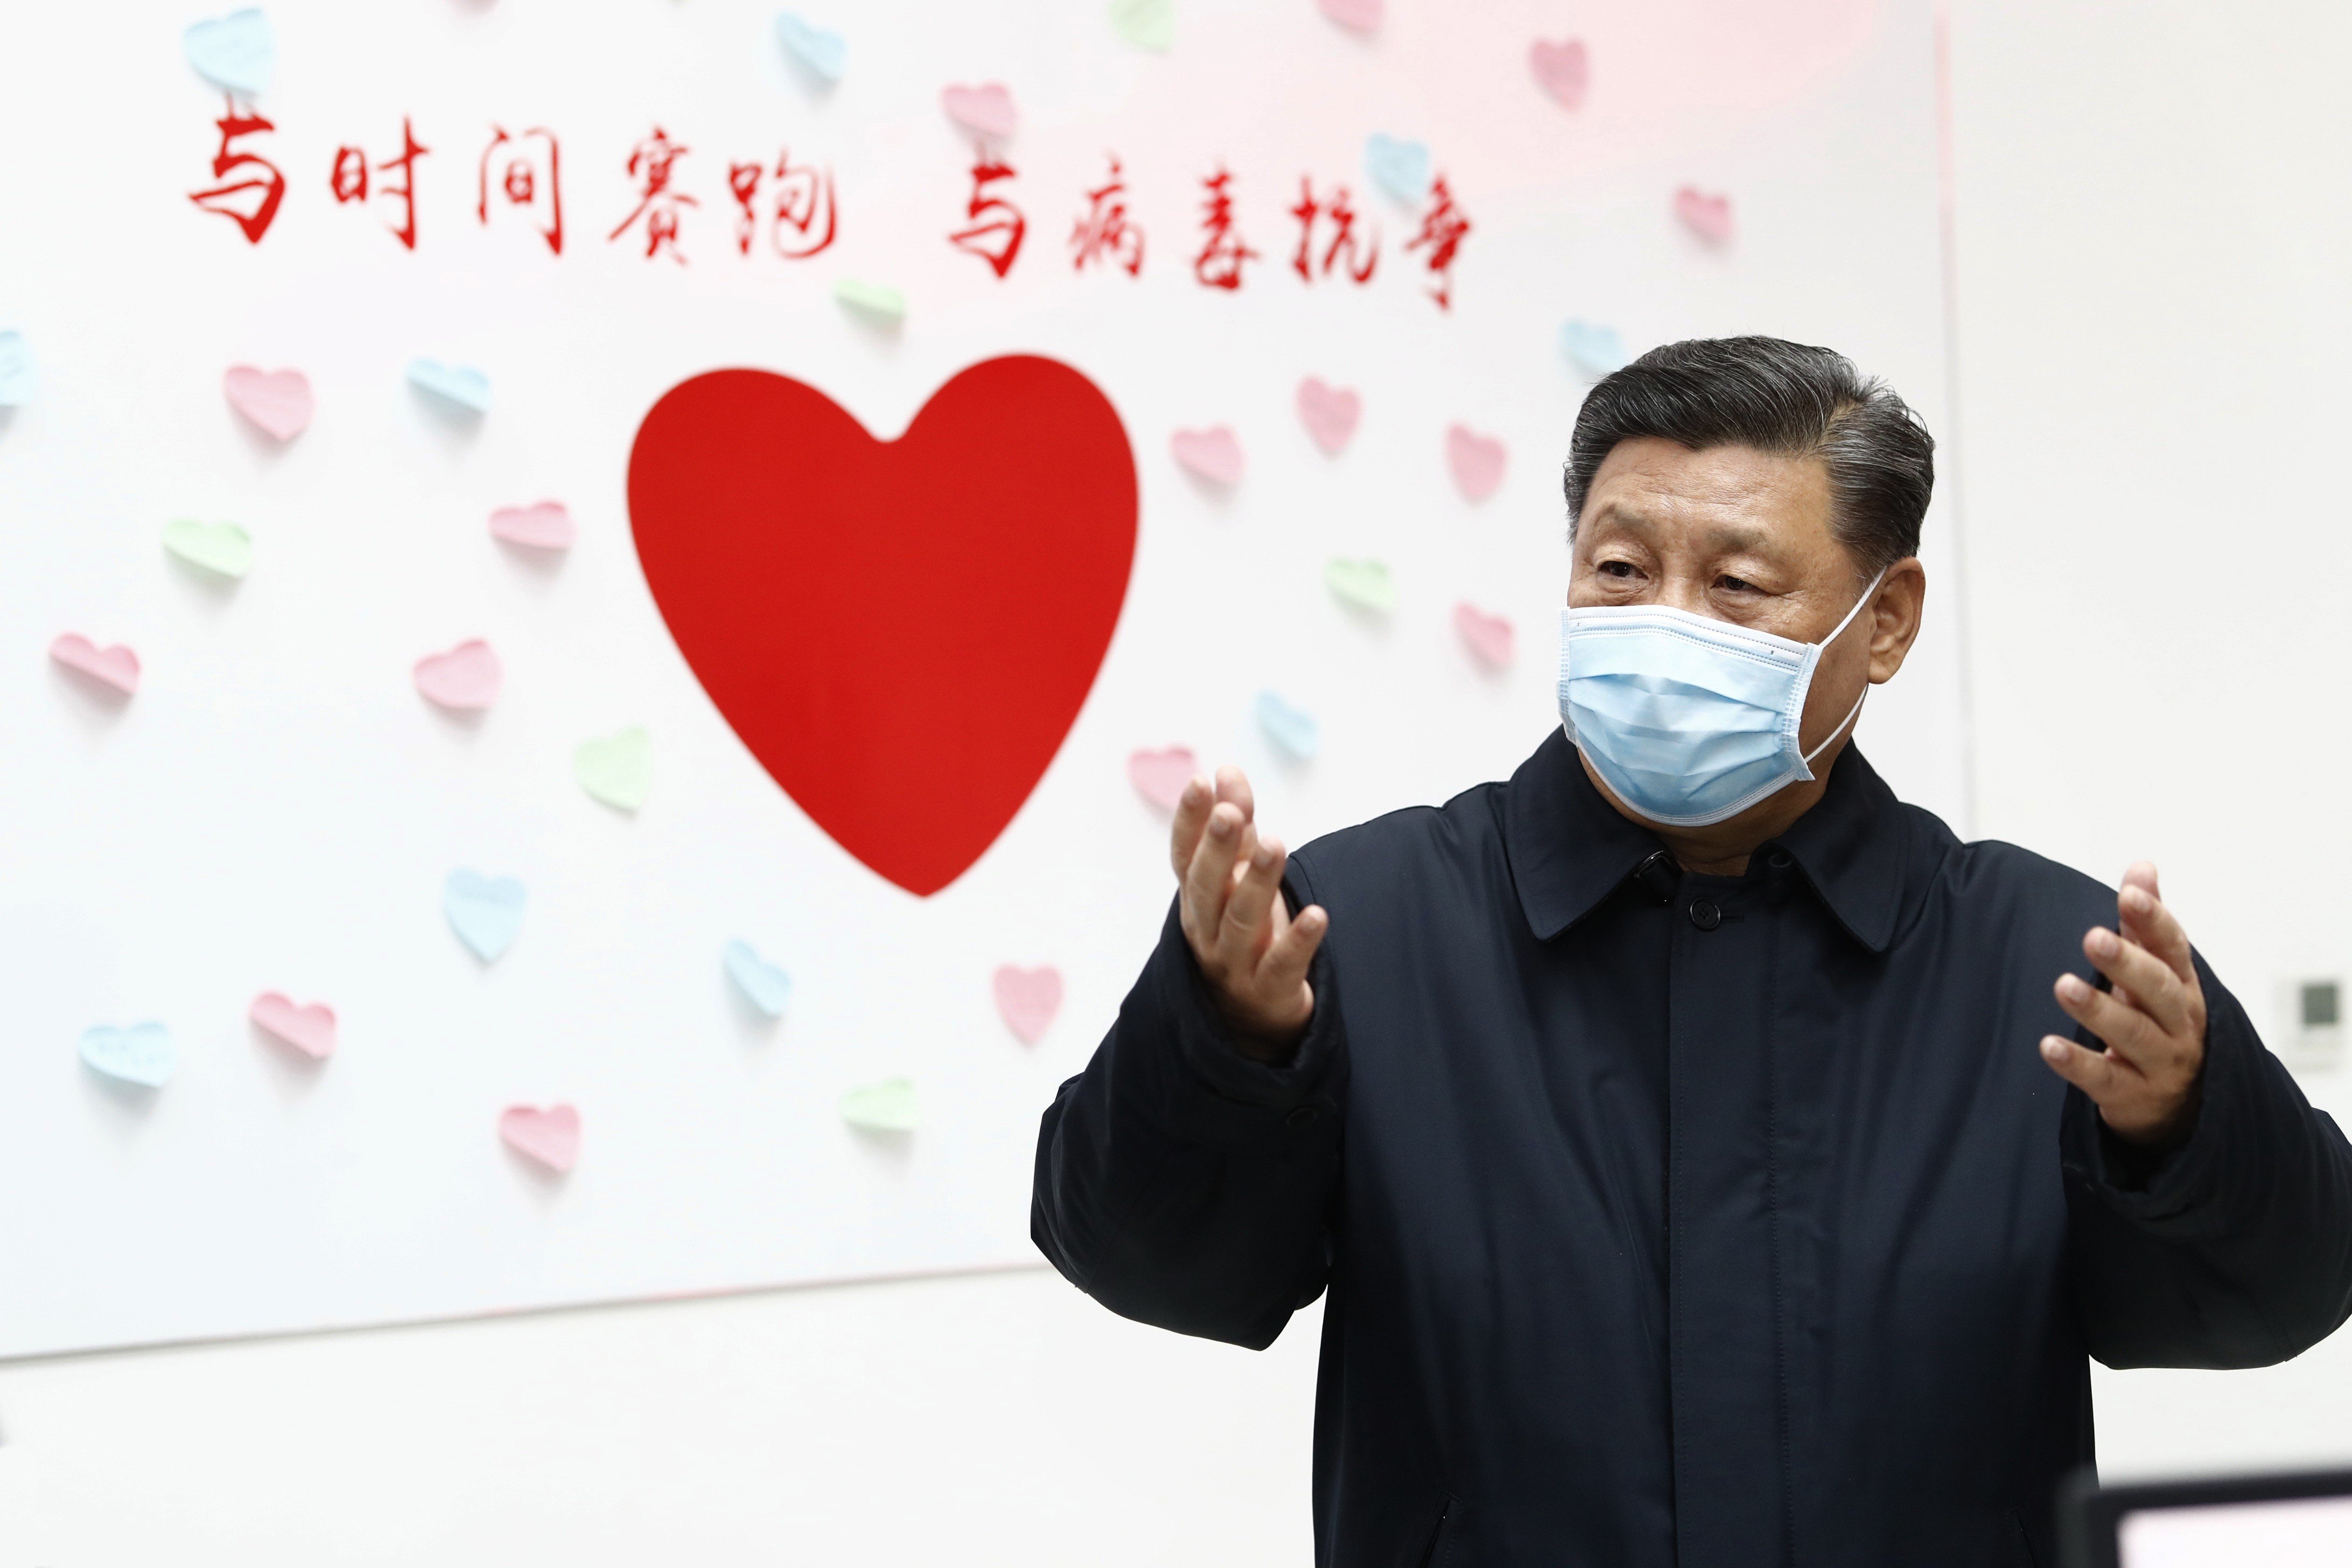 Chinese President Xi Jinping visits a centre for disease control and prevention in Beijing on February 10. Photo: AP